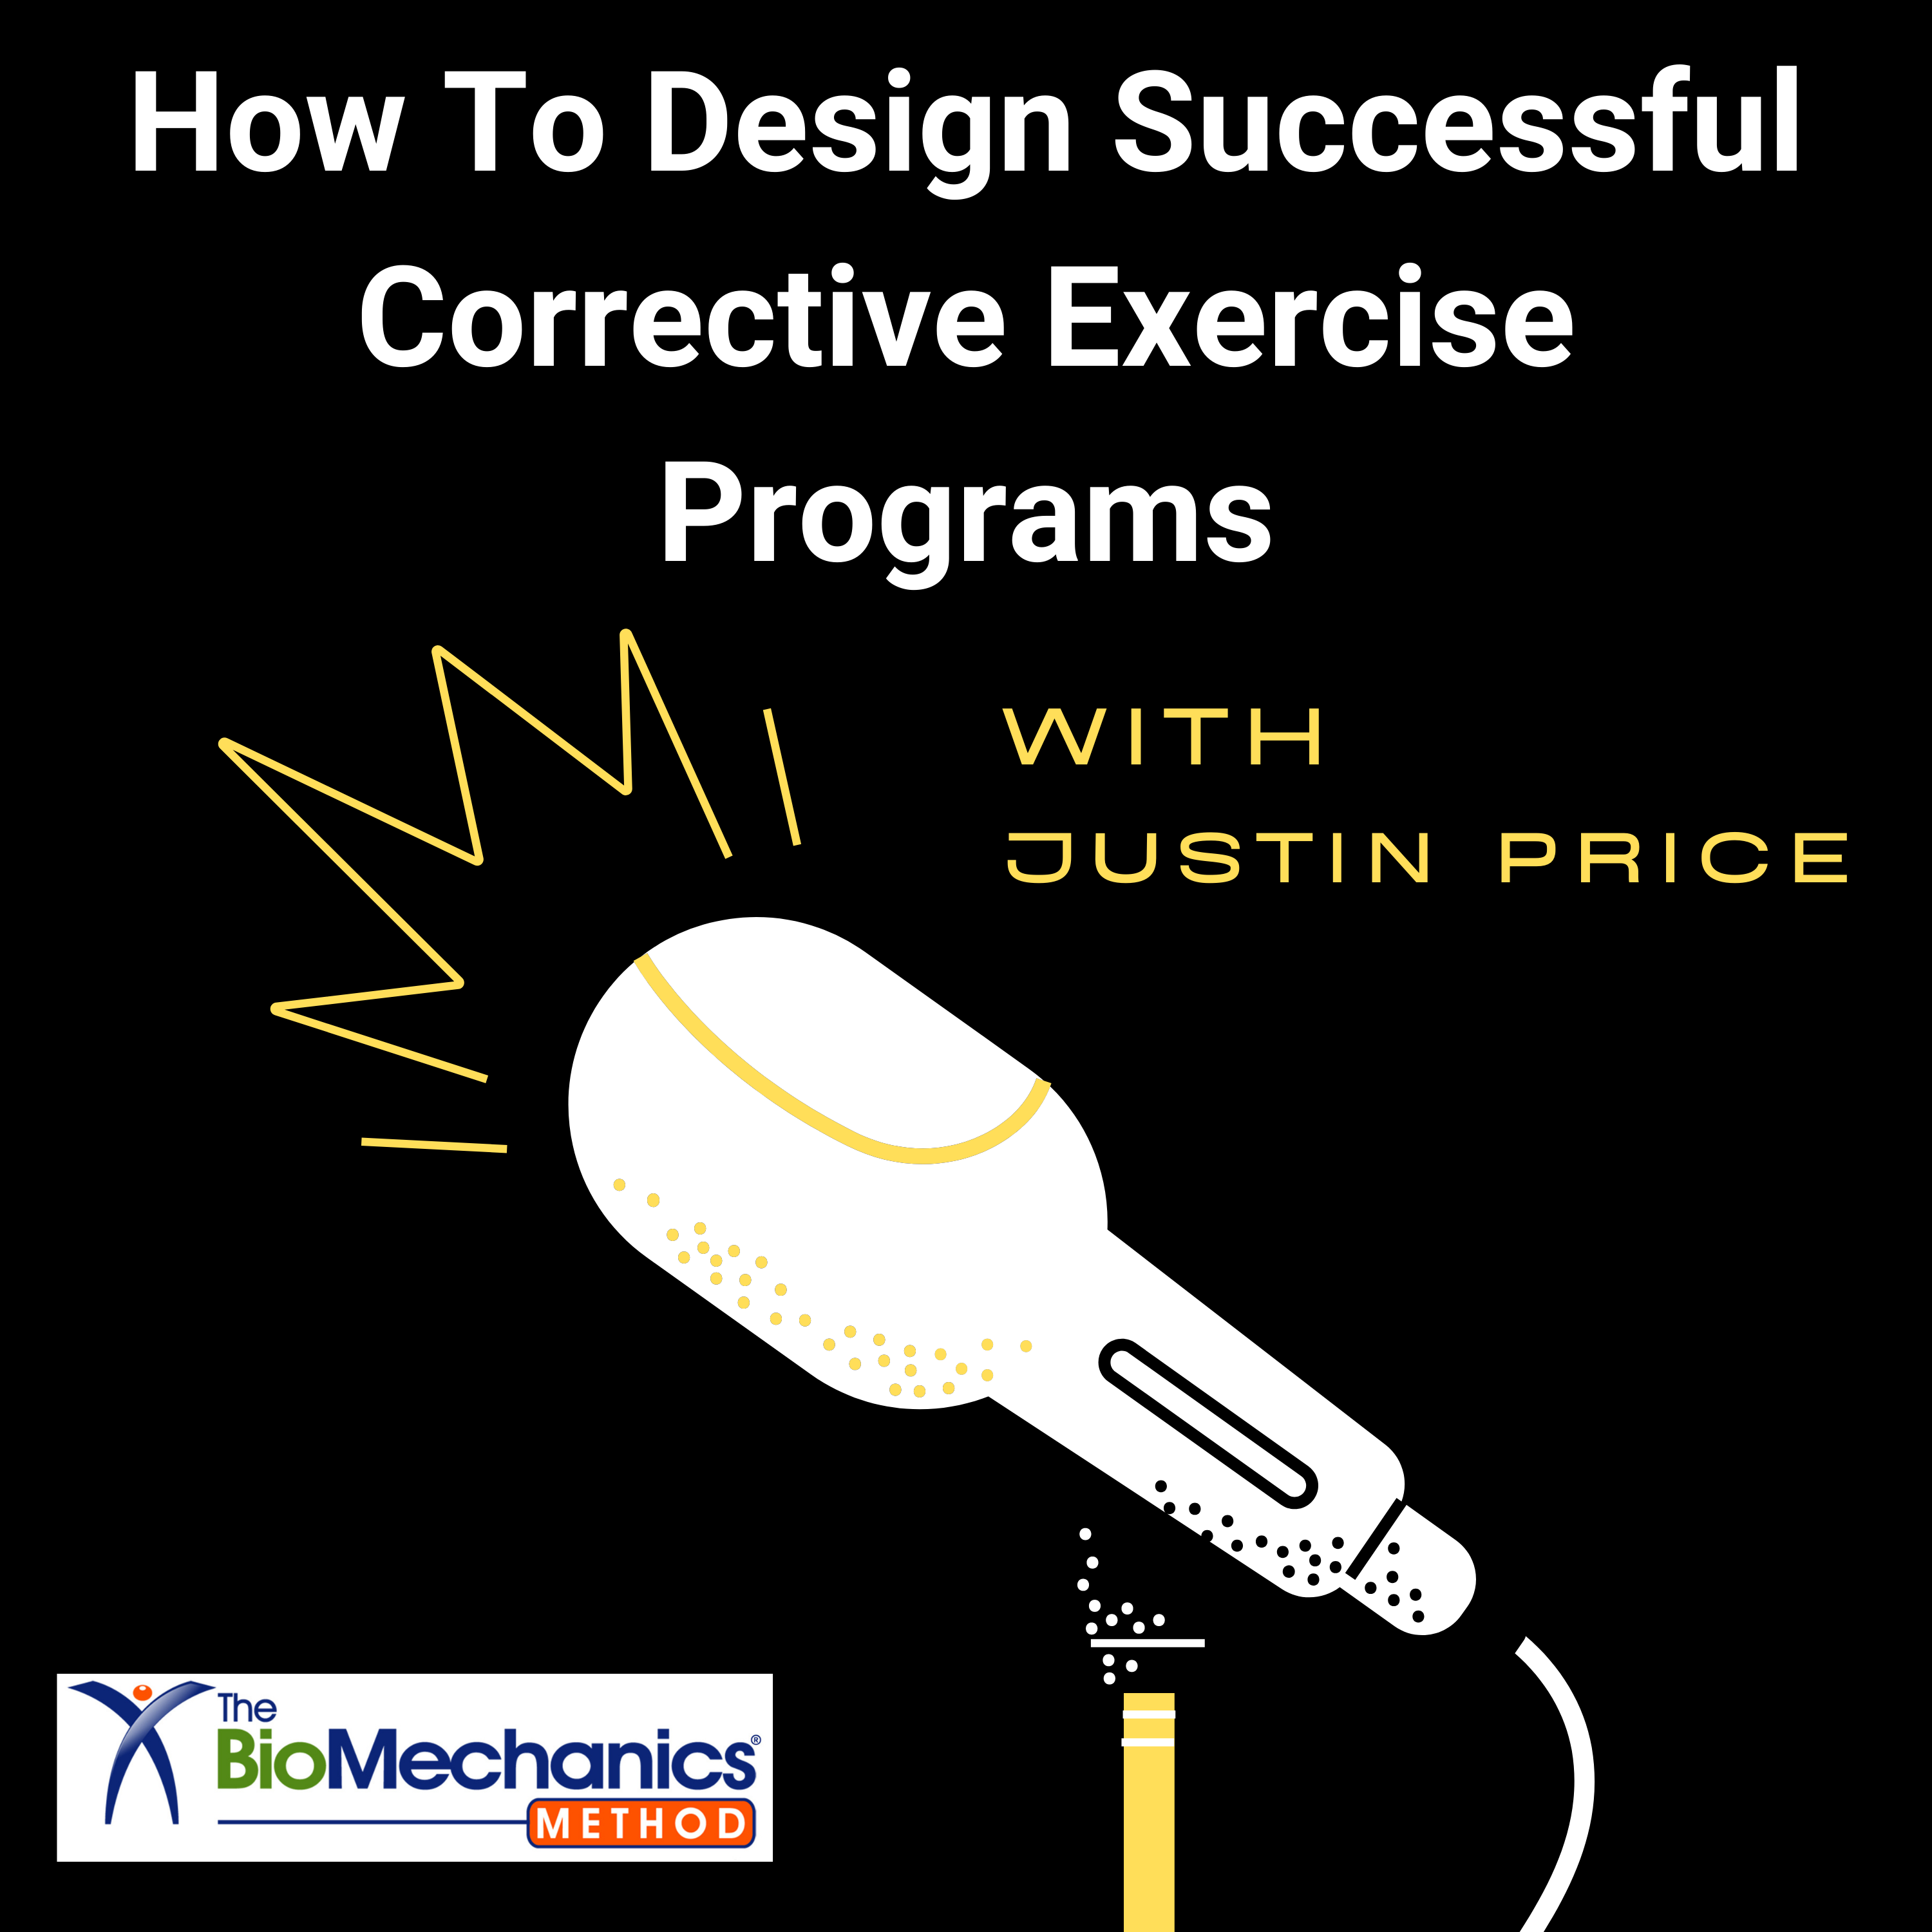 How To Design Successful Corrective Exercise Programs